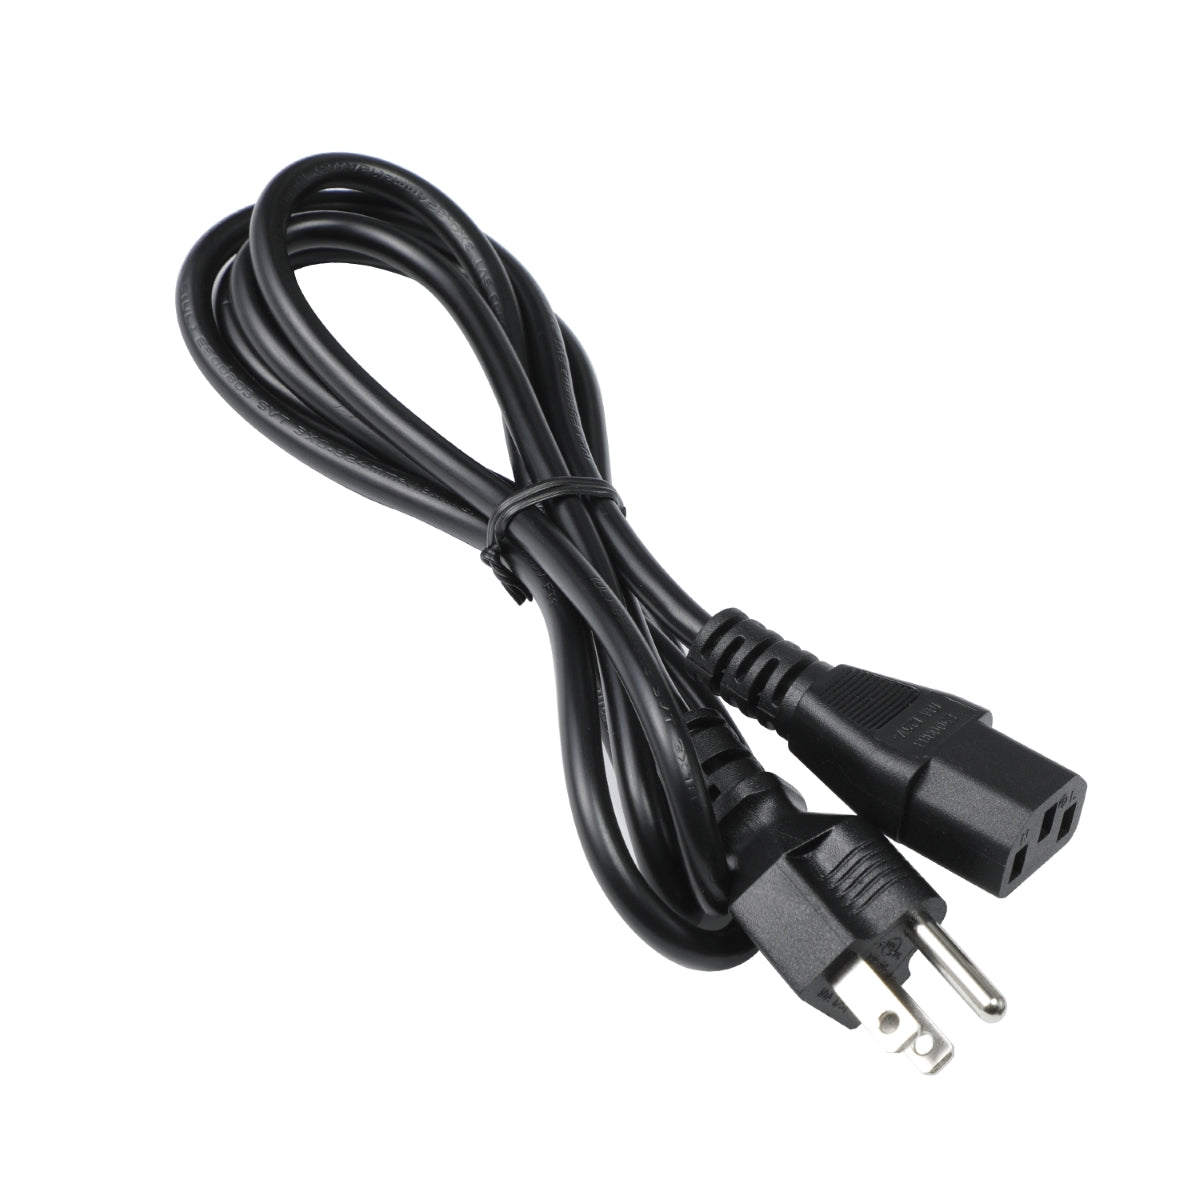 Dell S3422DWG Monitor Display Power Cord